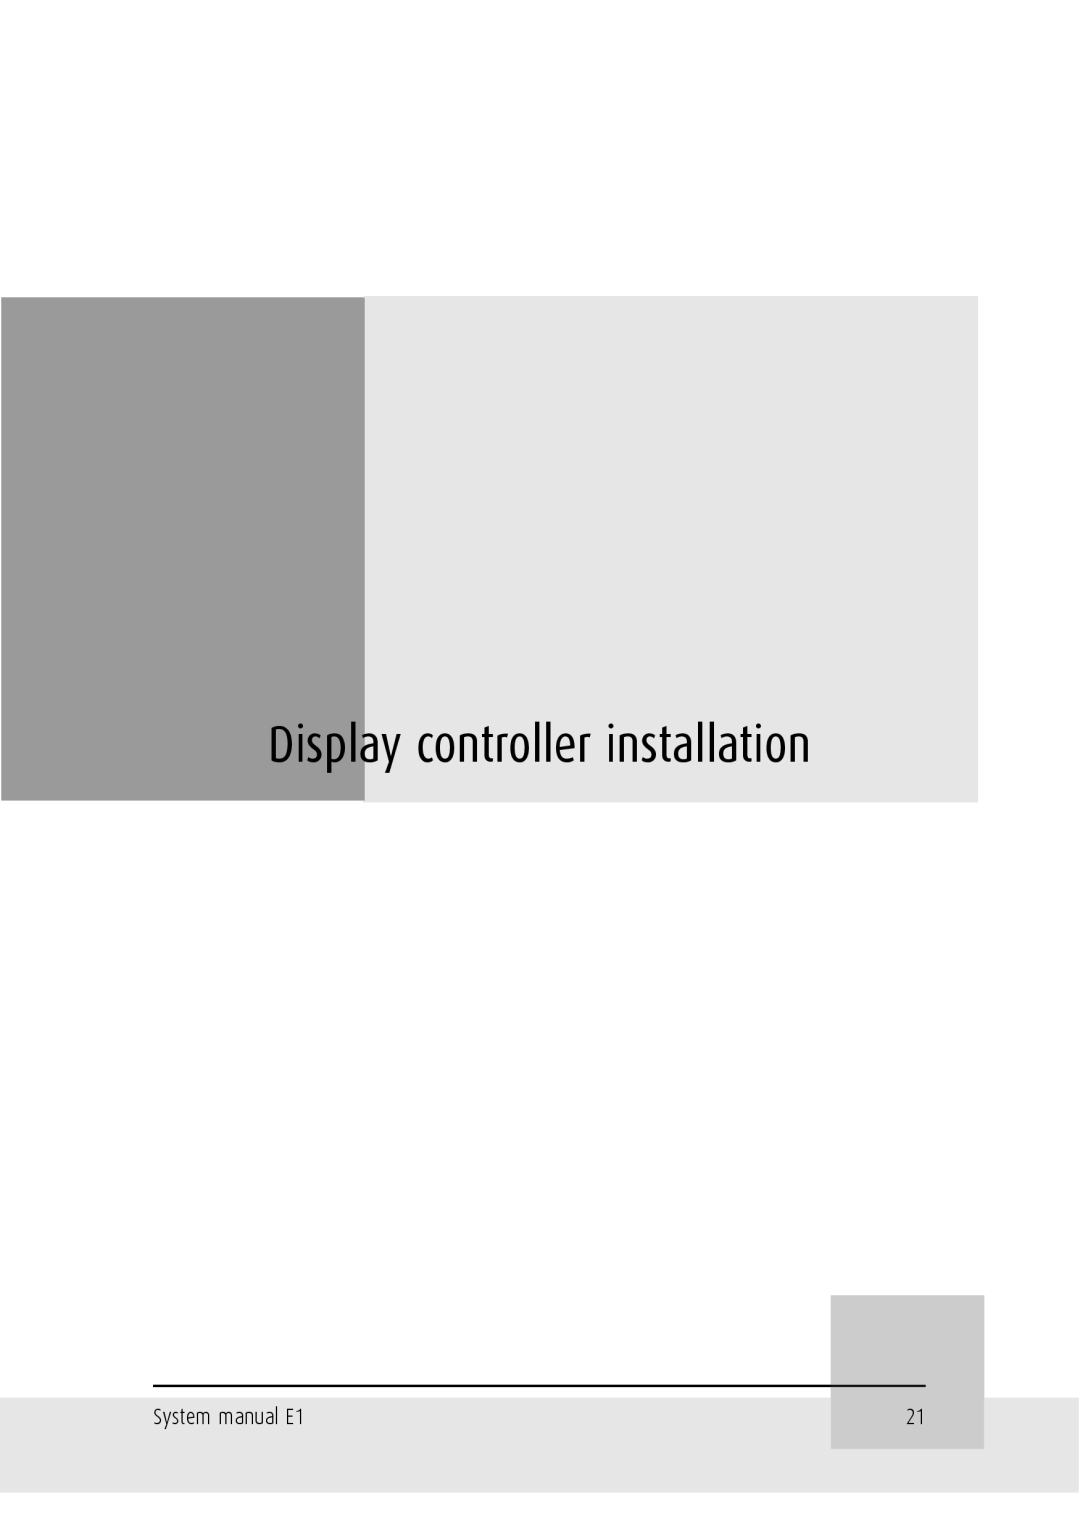 Barco Display controller installation, System manual E1 